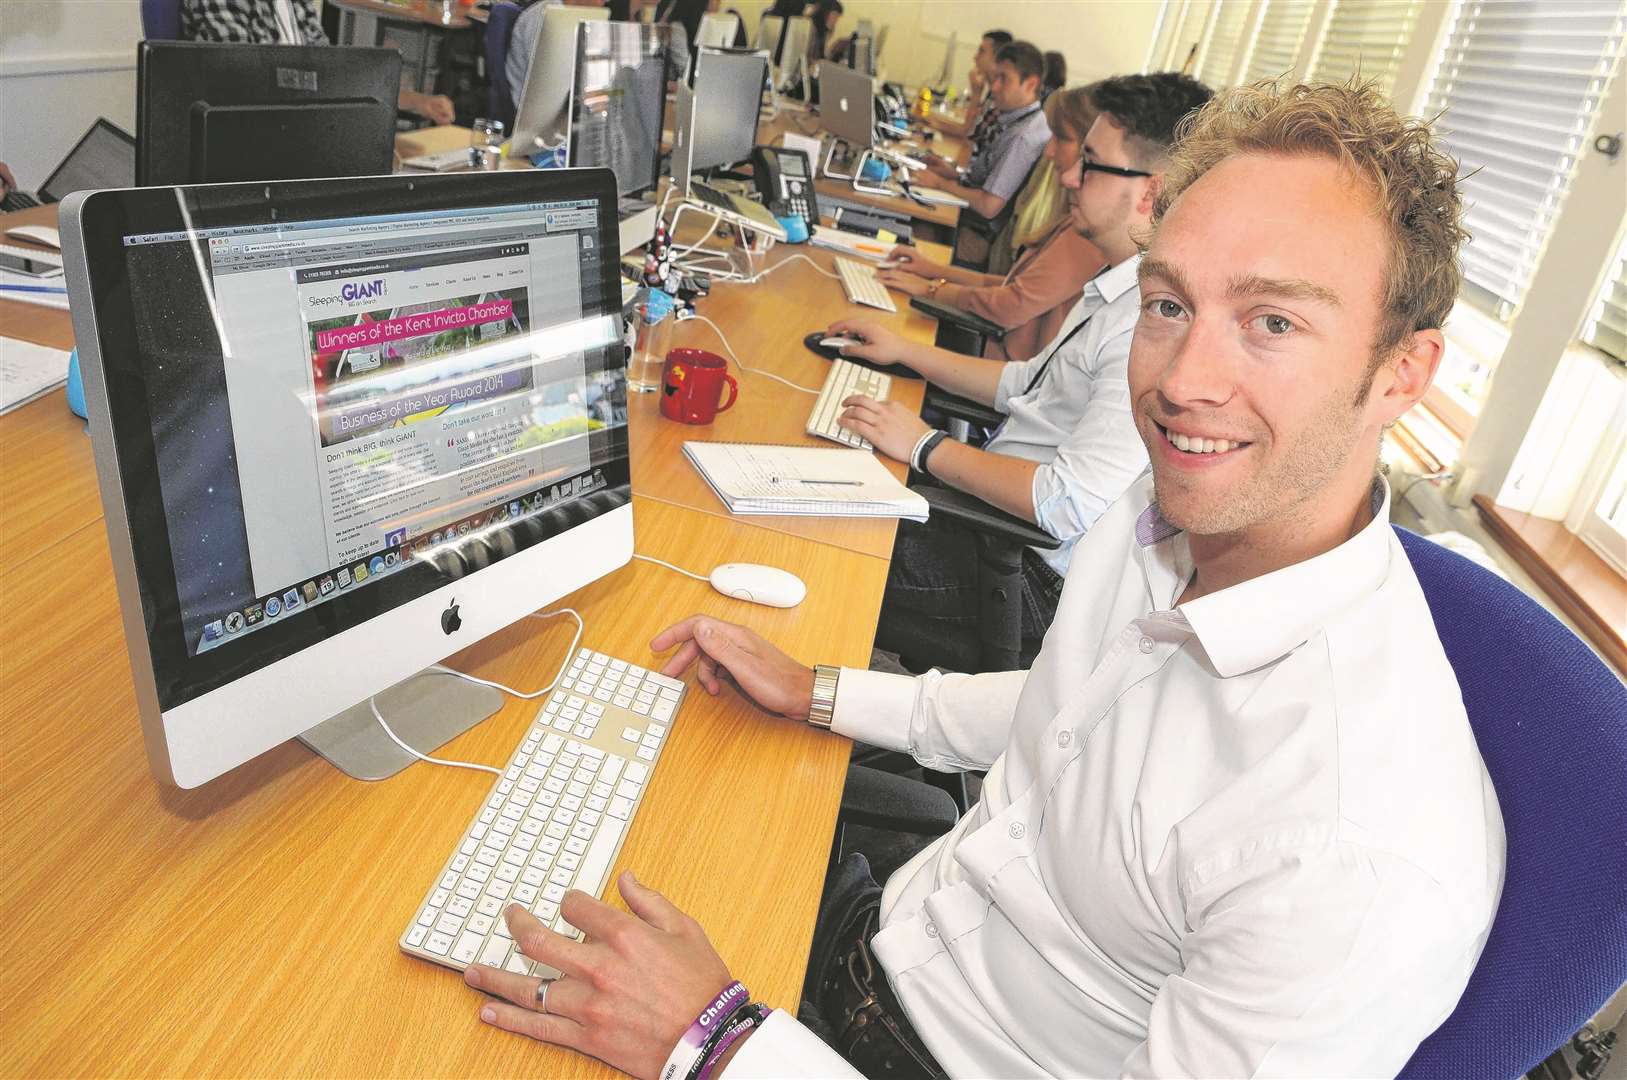 Sleeping Giant Media chief executive Luke Quilter